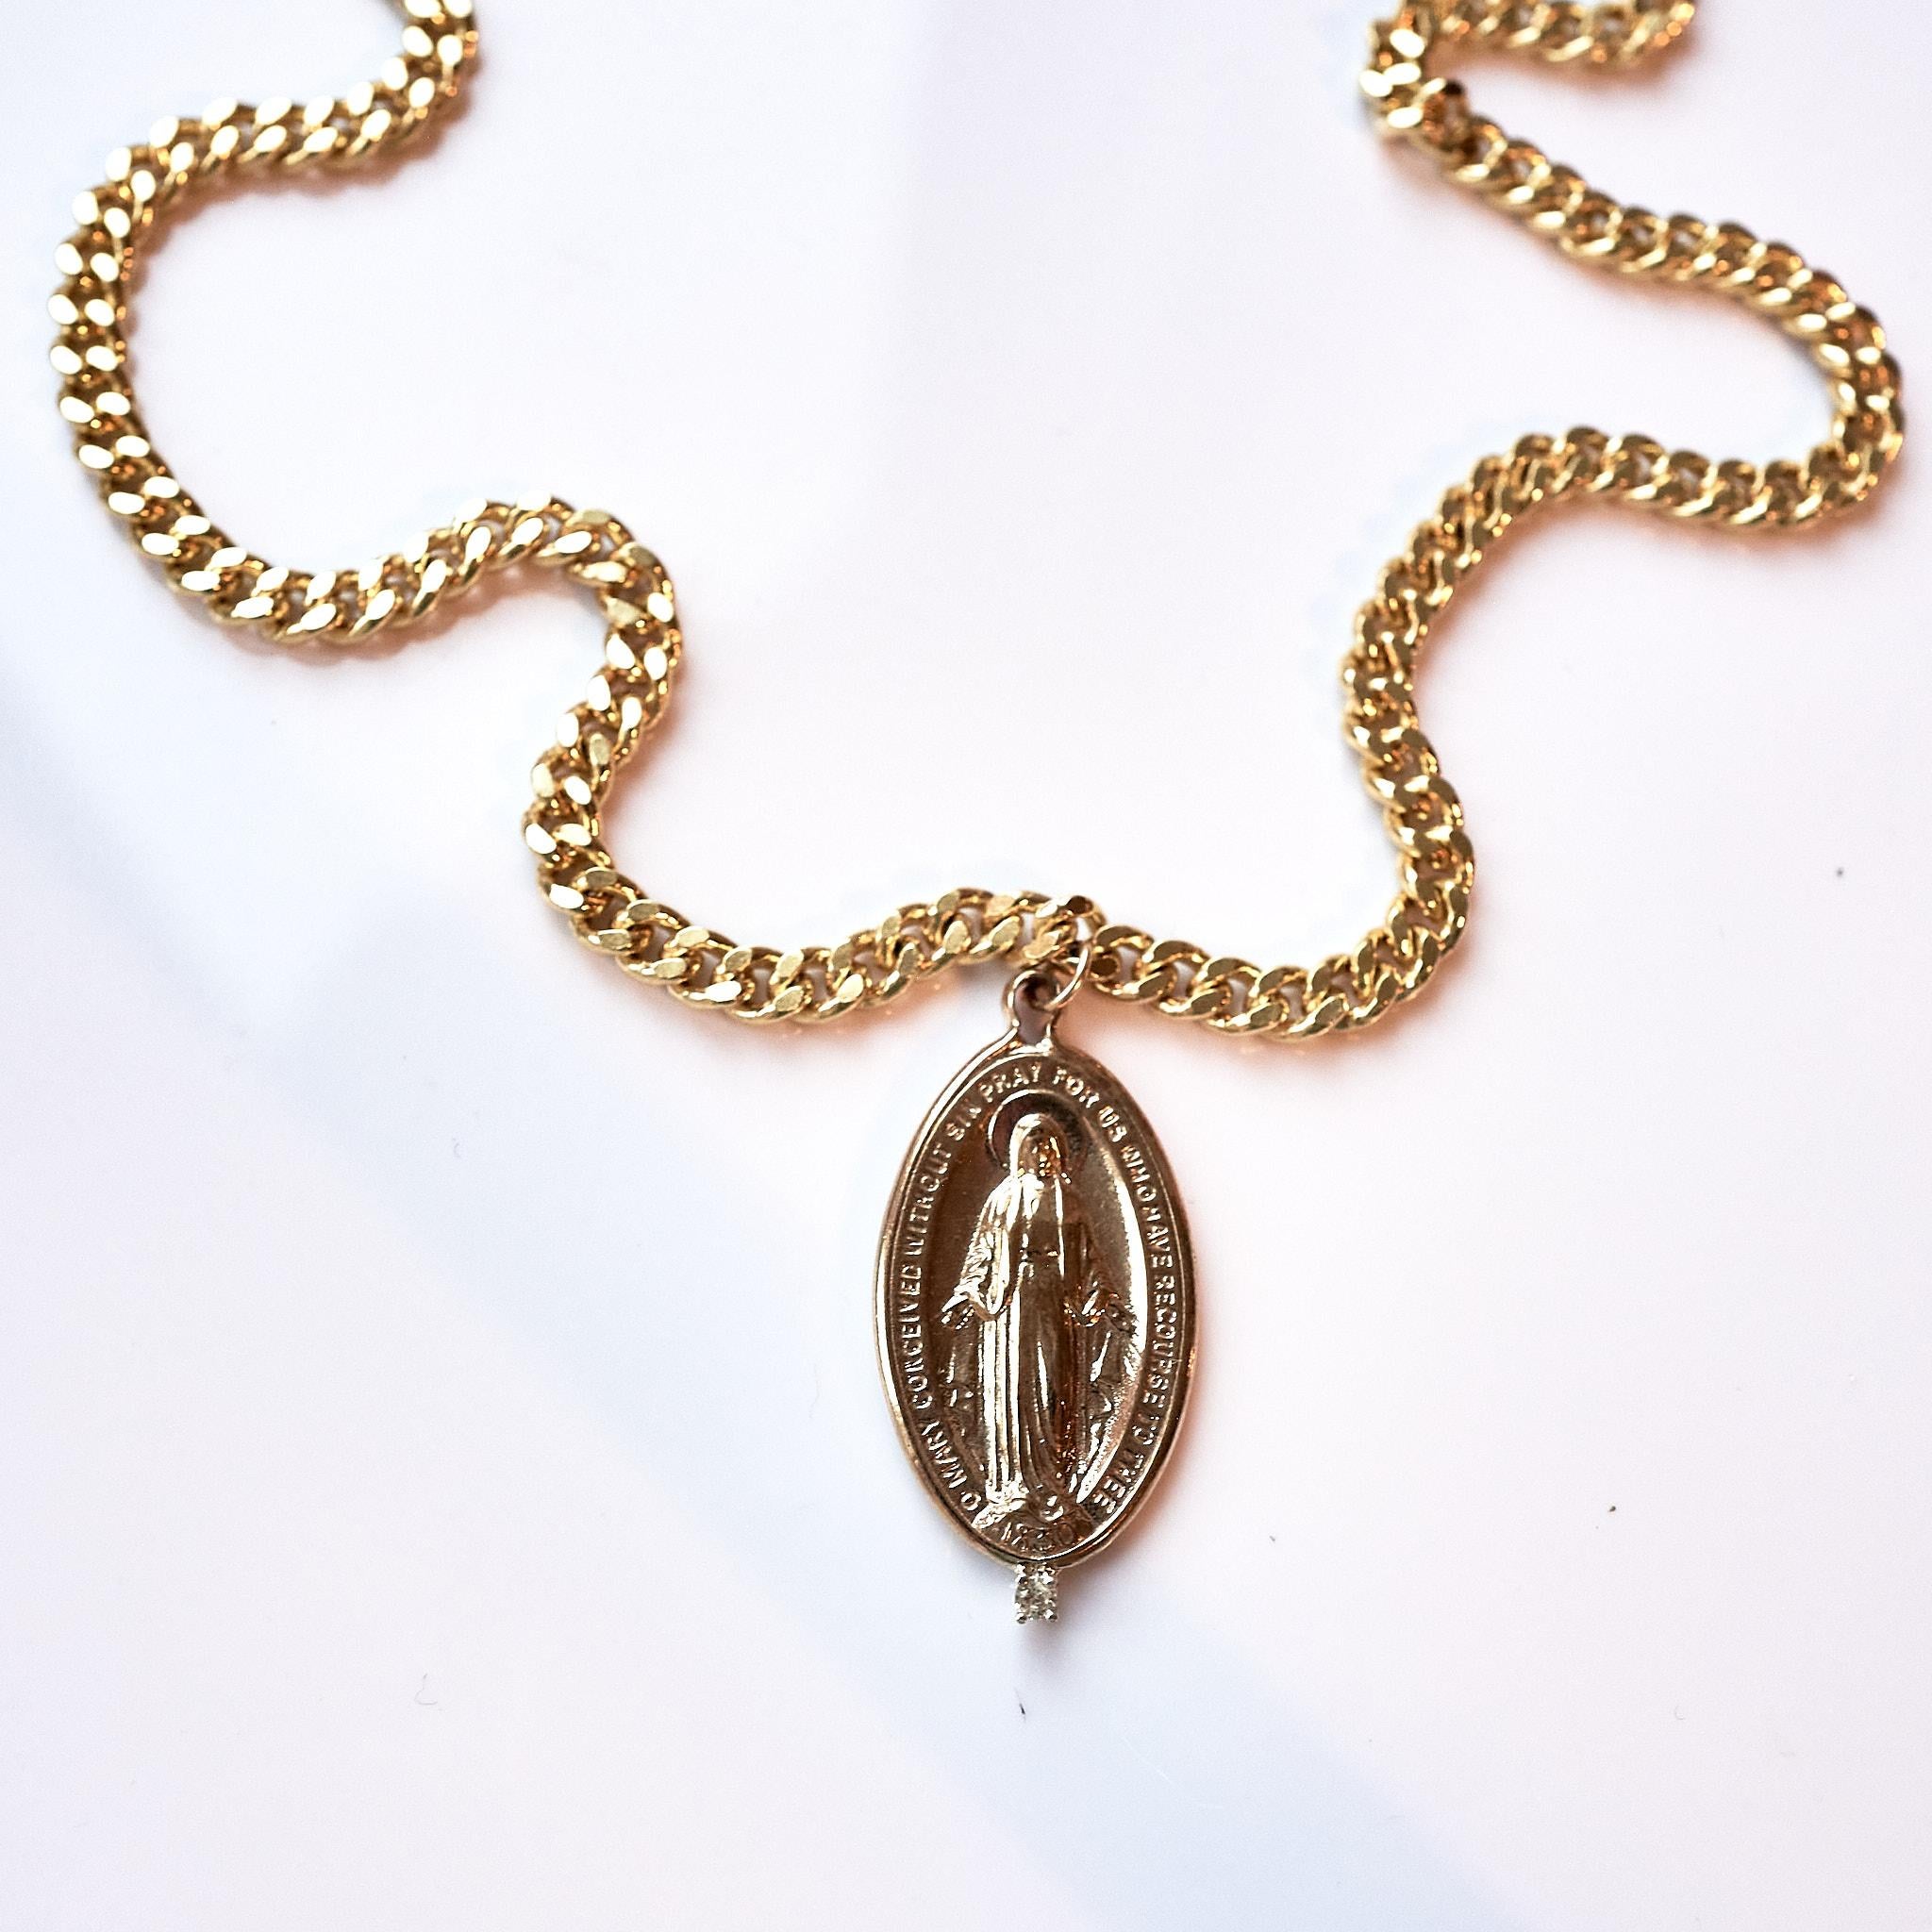 White Diamond Medal Virgin Mary Oval Medal Chain Necklace J Dauphin For Sale 7